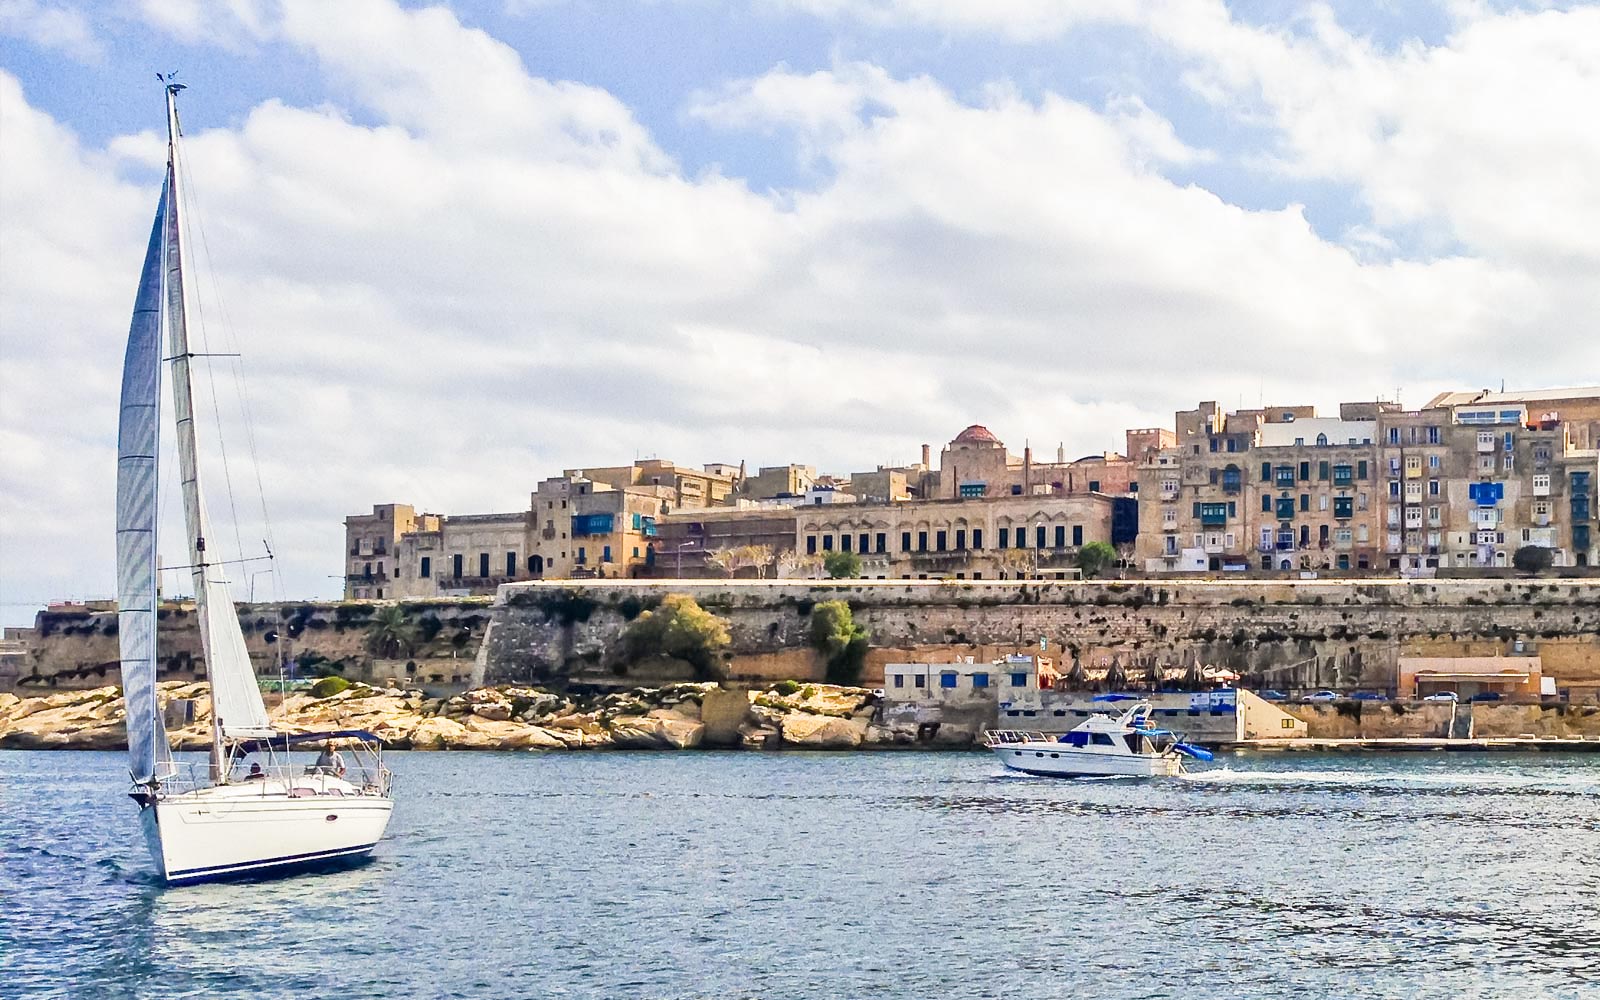 Boats in the Maltese harbour